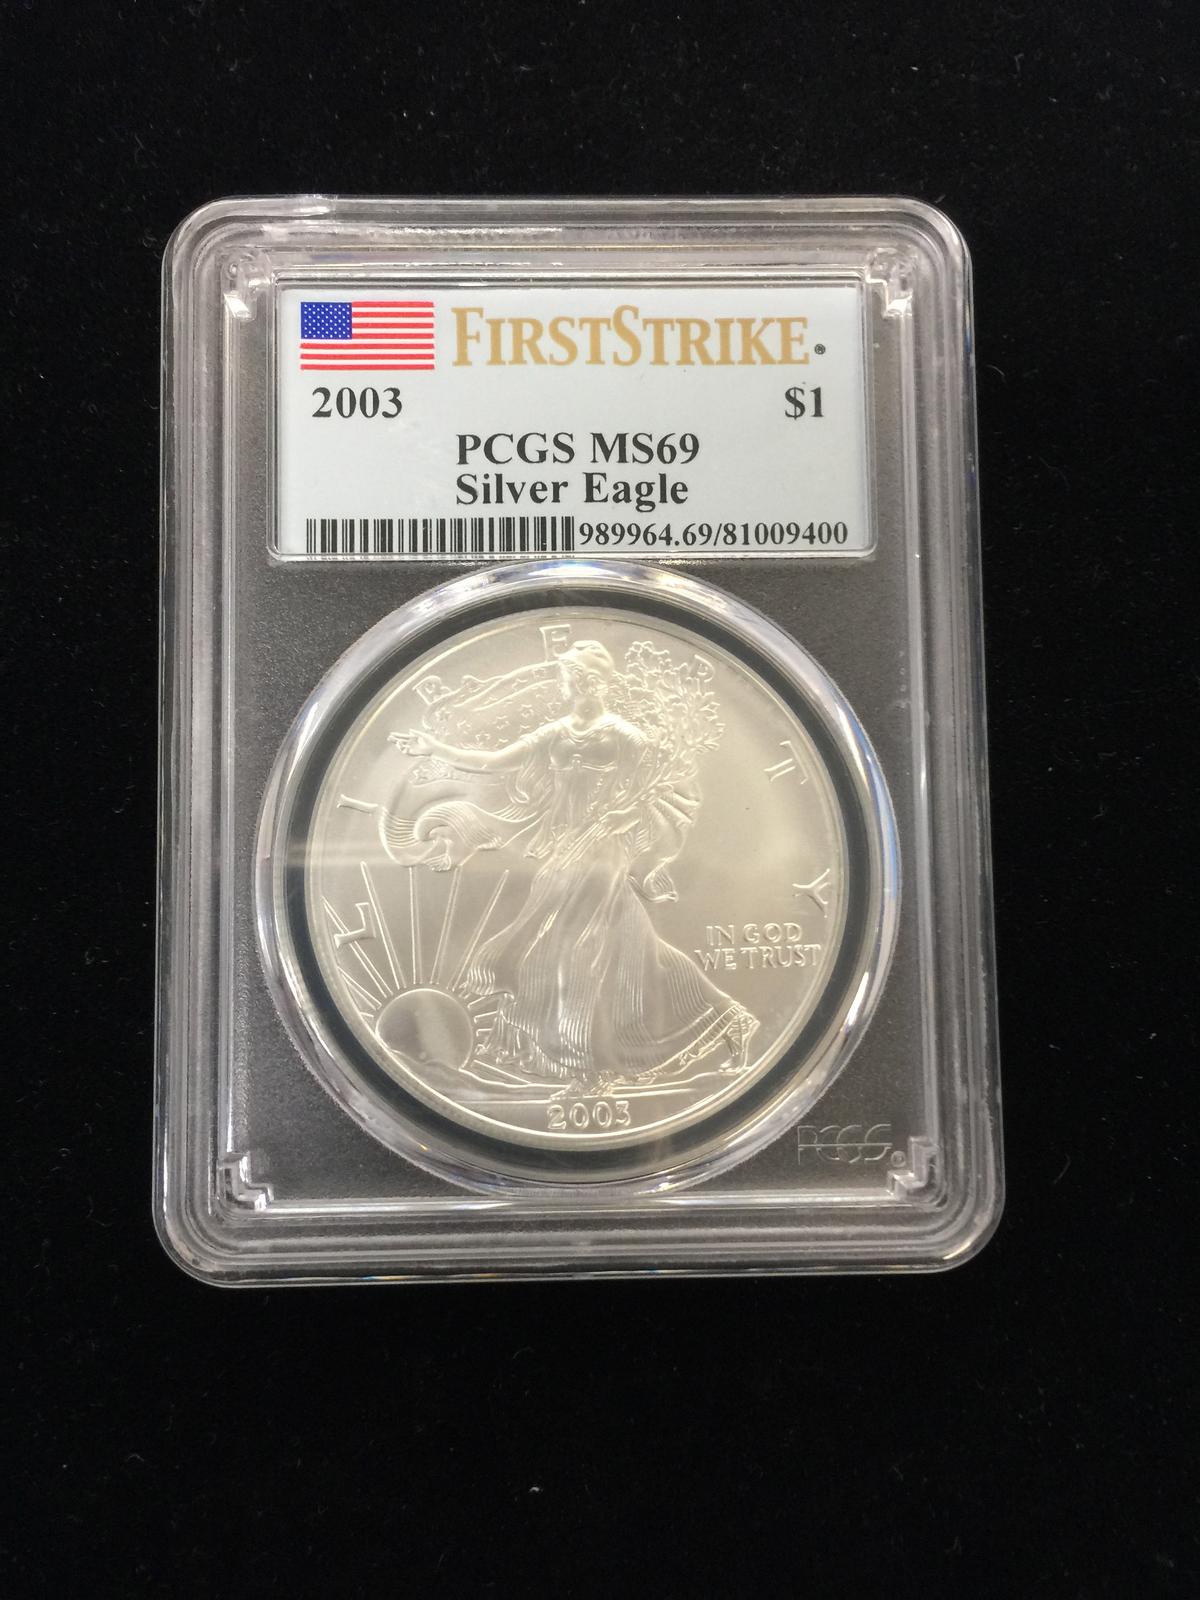 PCGS MS69 First Strike 2003 American Silver Eagle 1 Ounce .999 Silver Coin